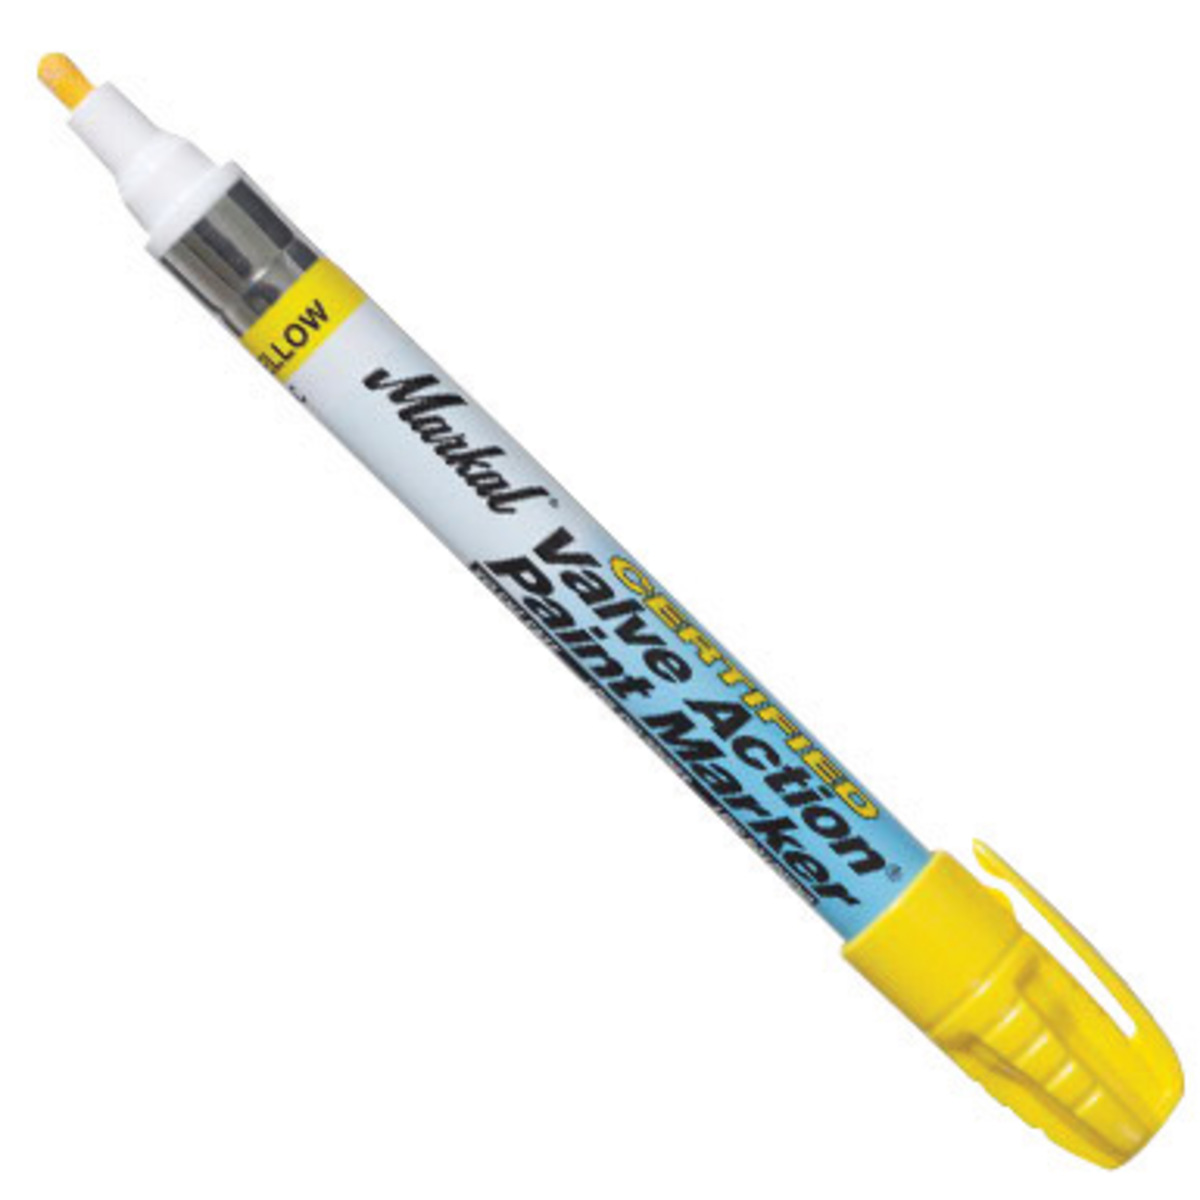 Markal 96801 Valve Action Paint Marker Yellow Carded